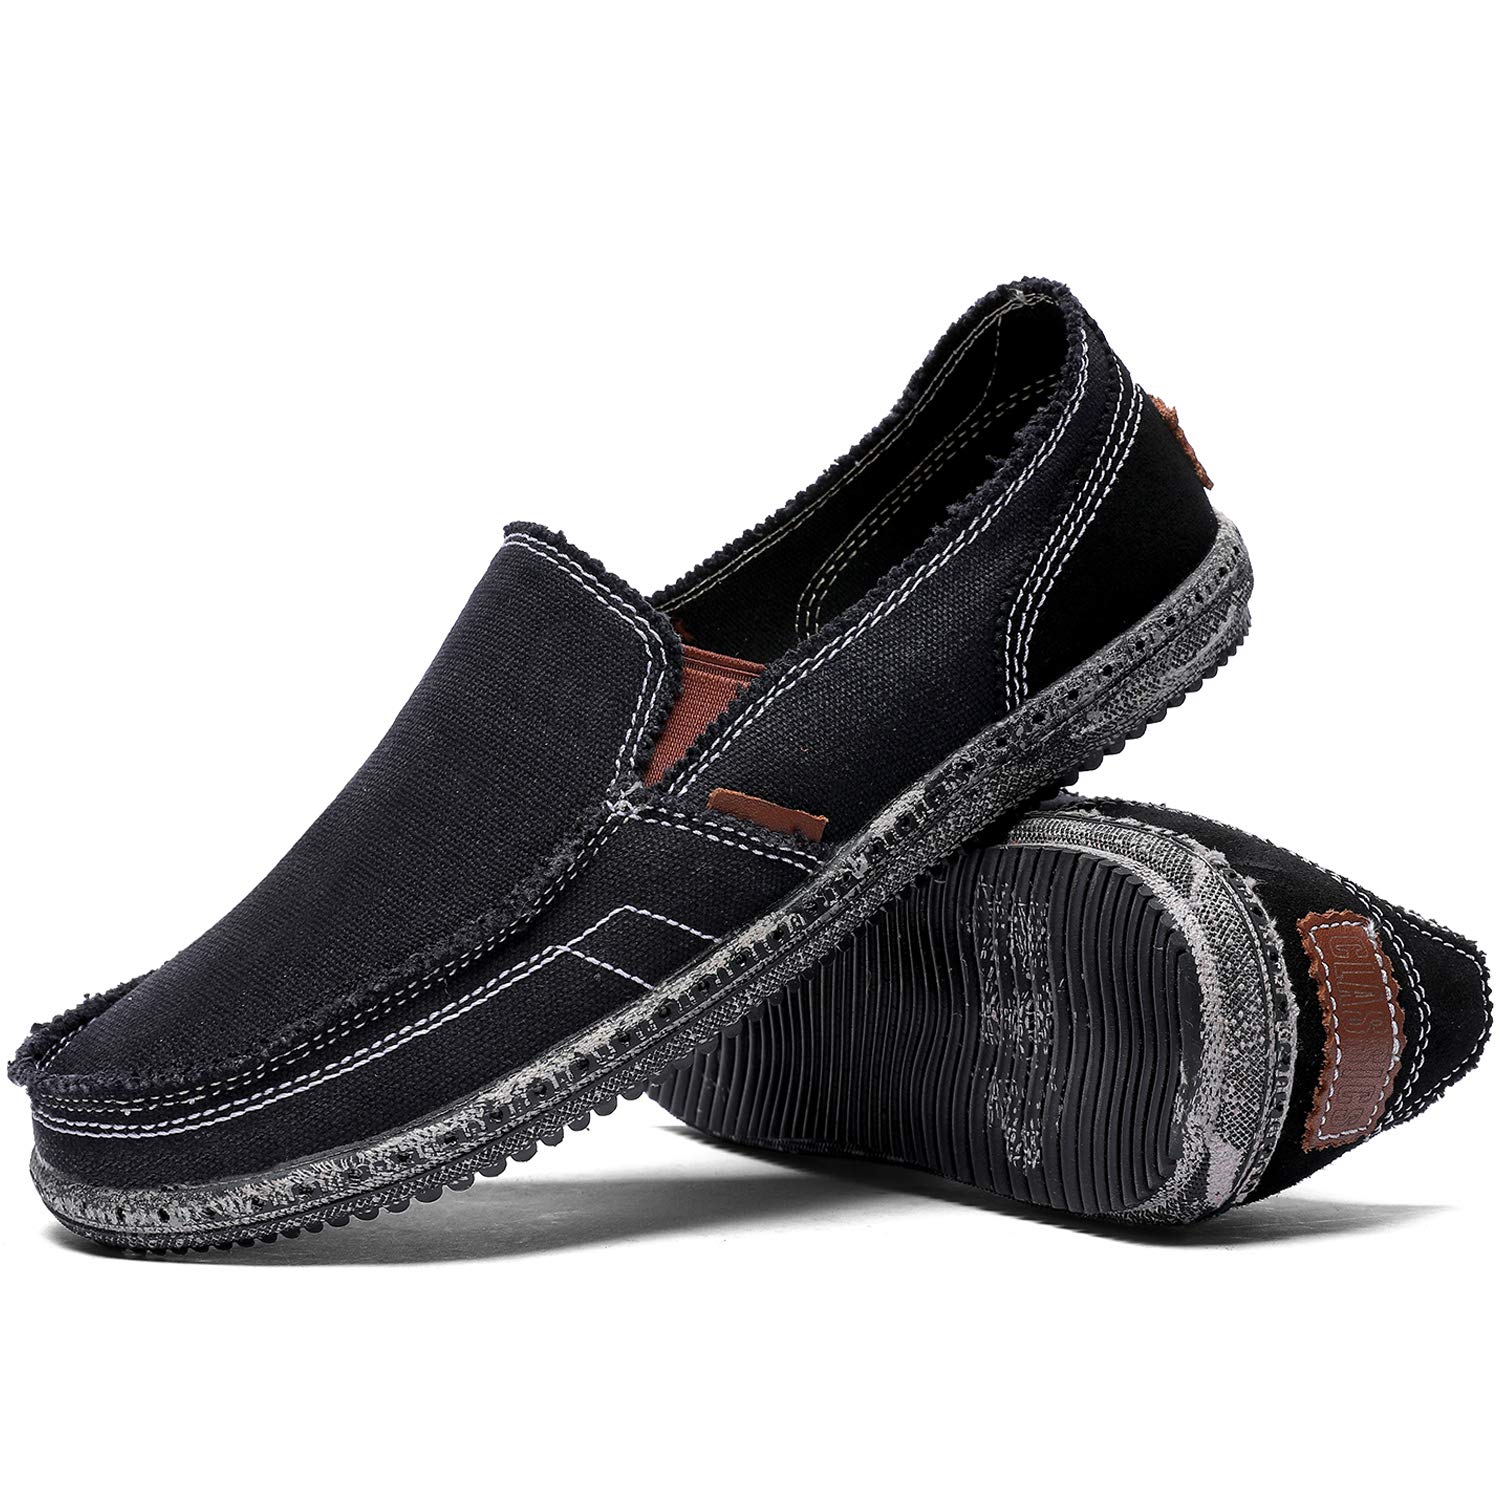 CASMAG Men's Casual Cloth Shoes Canvas Slip on Loafers Leisure Vintage Flat Boat Shoes